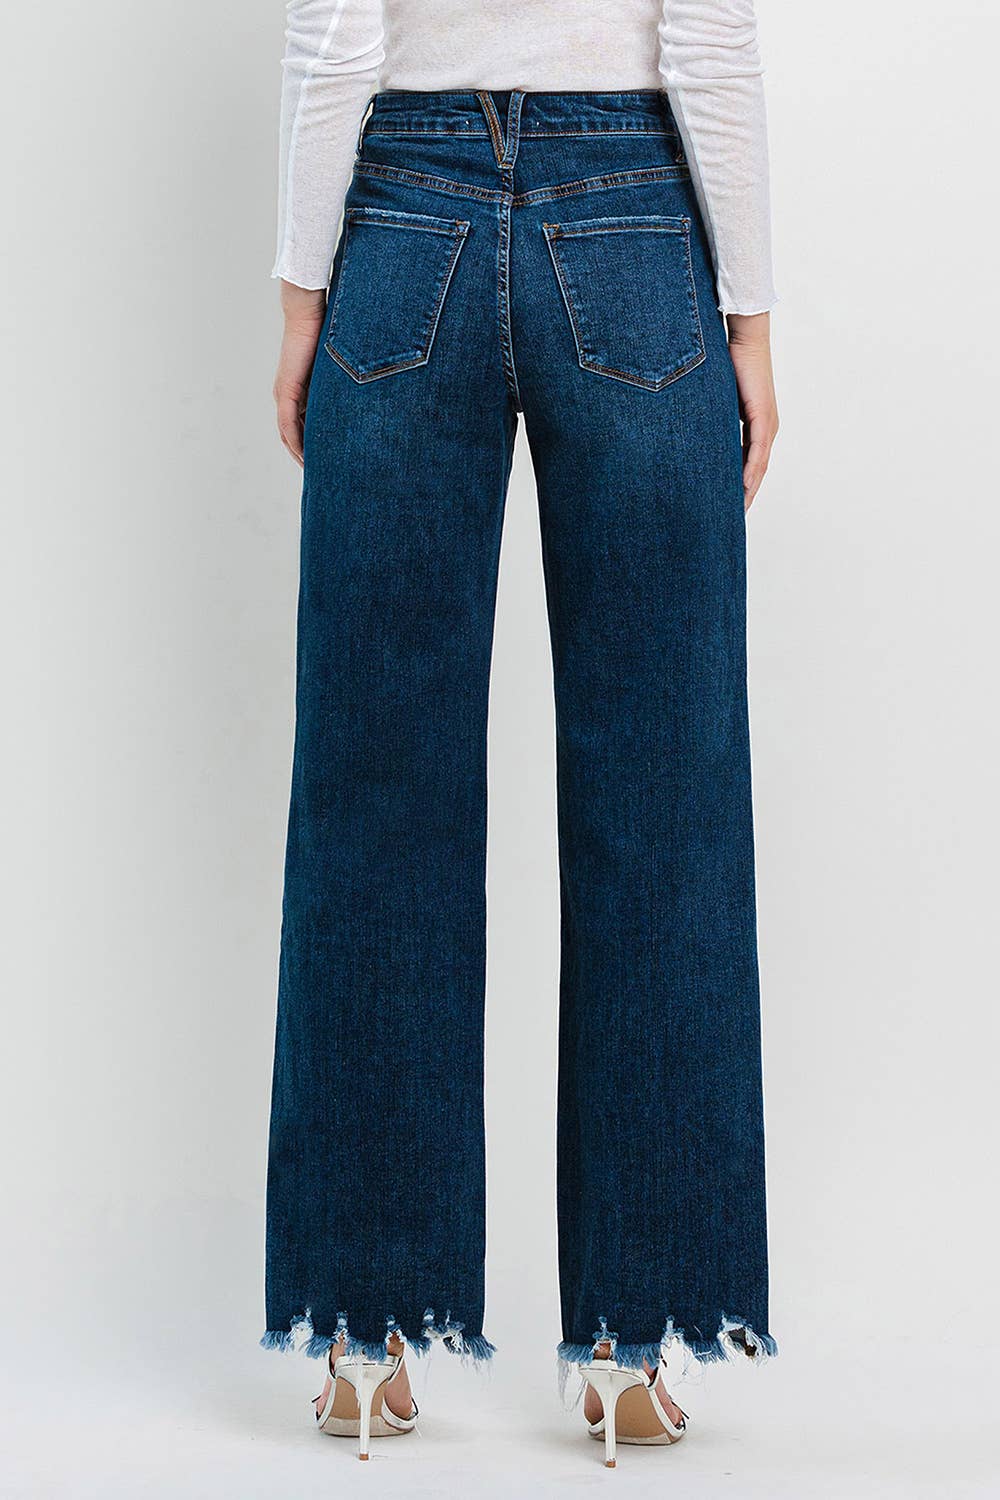 Curvy 90S Vintage Ultra High Rise Loose Fit Jeans